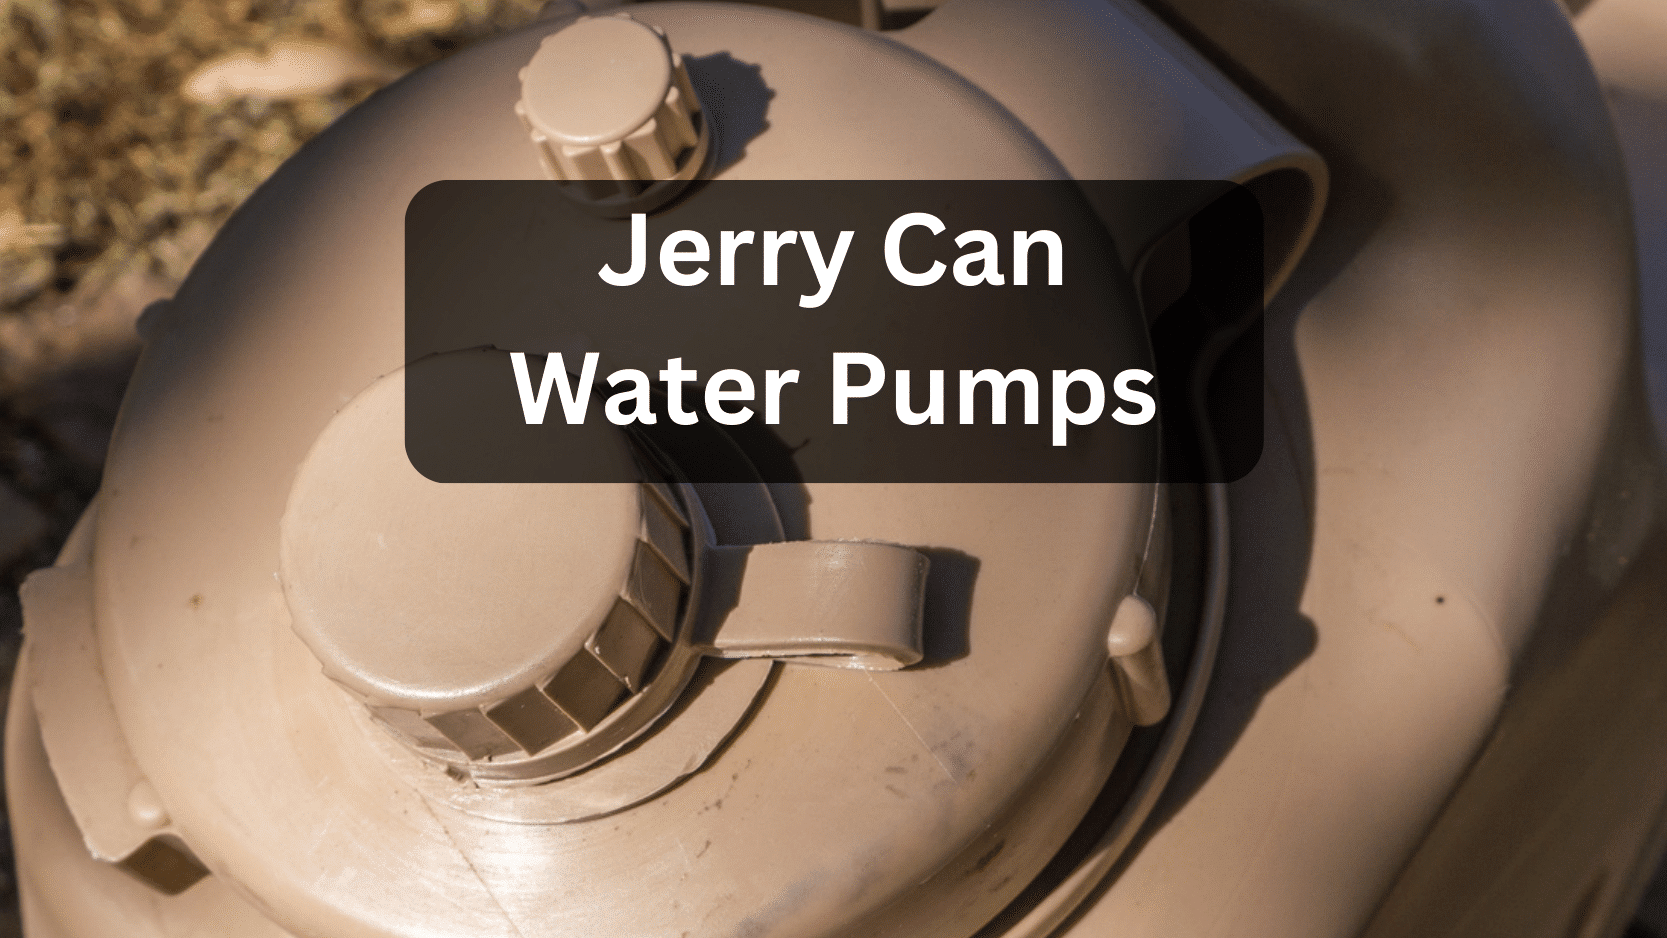 Jerry Can Water Pumps: Electric, Manual, Taps, and DIY